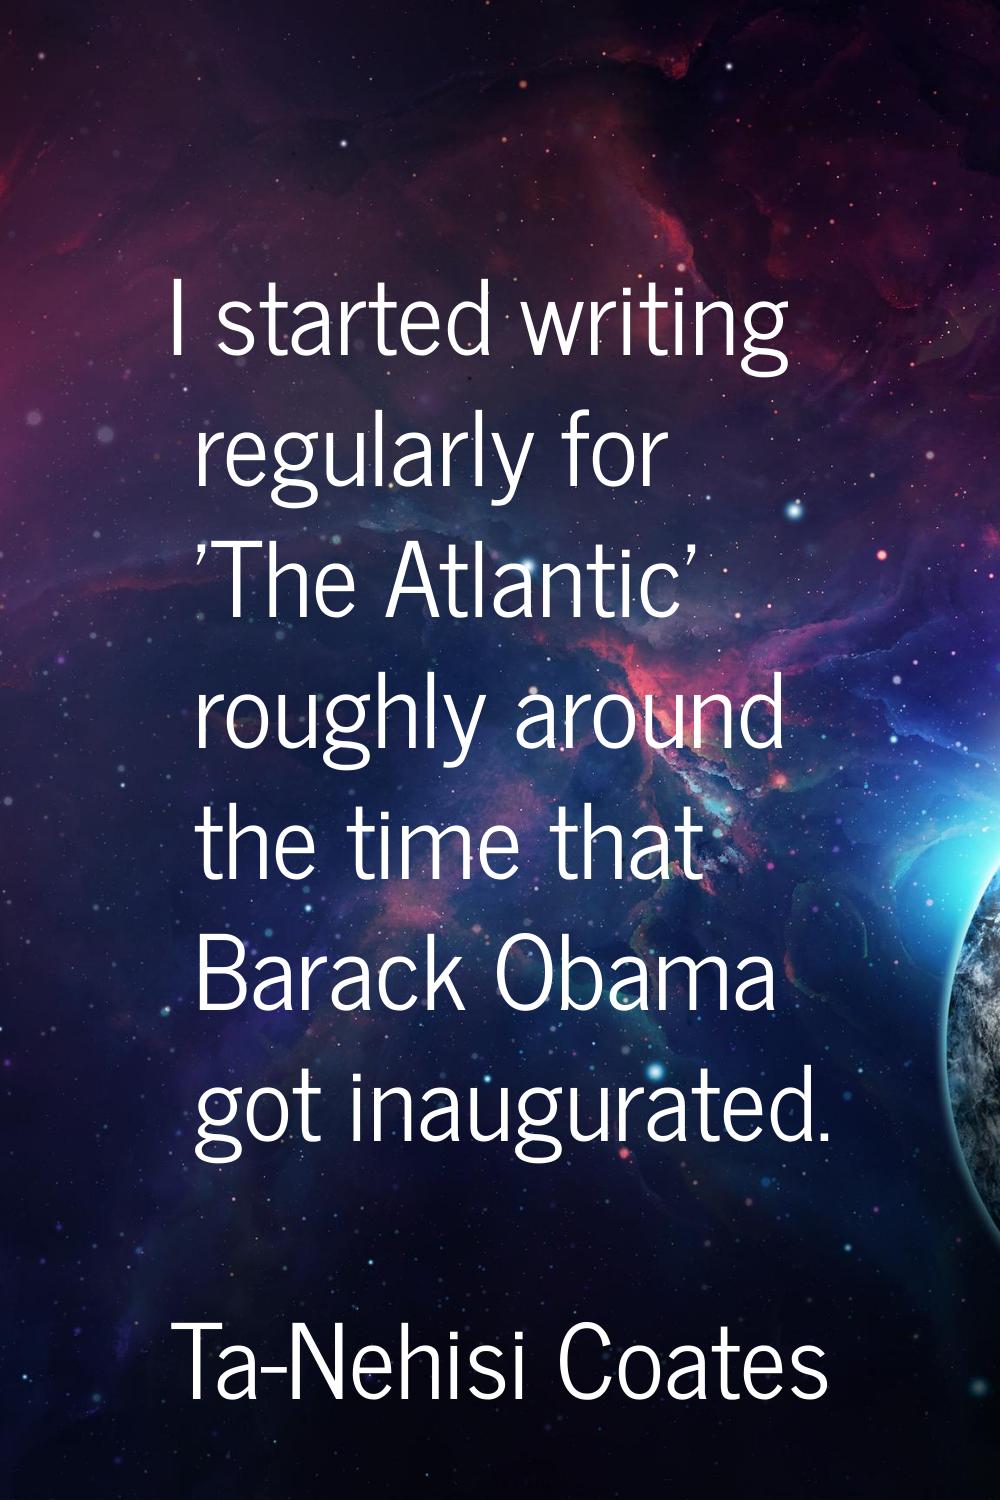 I started writing regularly for 'The Atlantic' roughly around the time that Barack Obama got inaugu